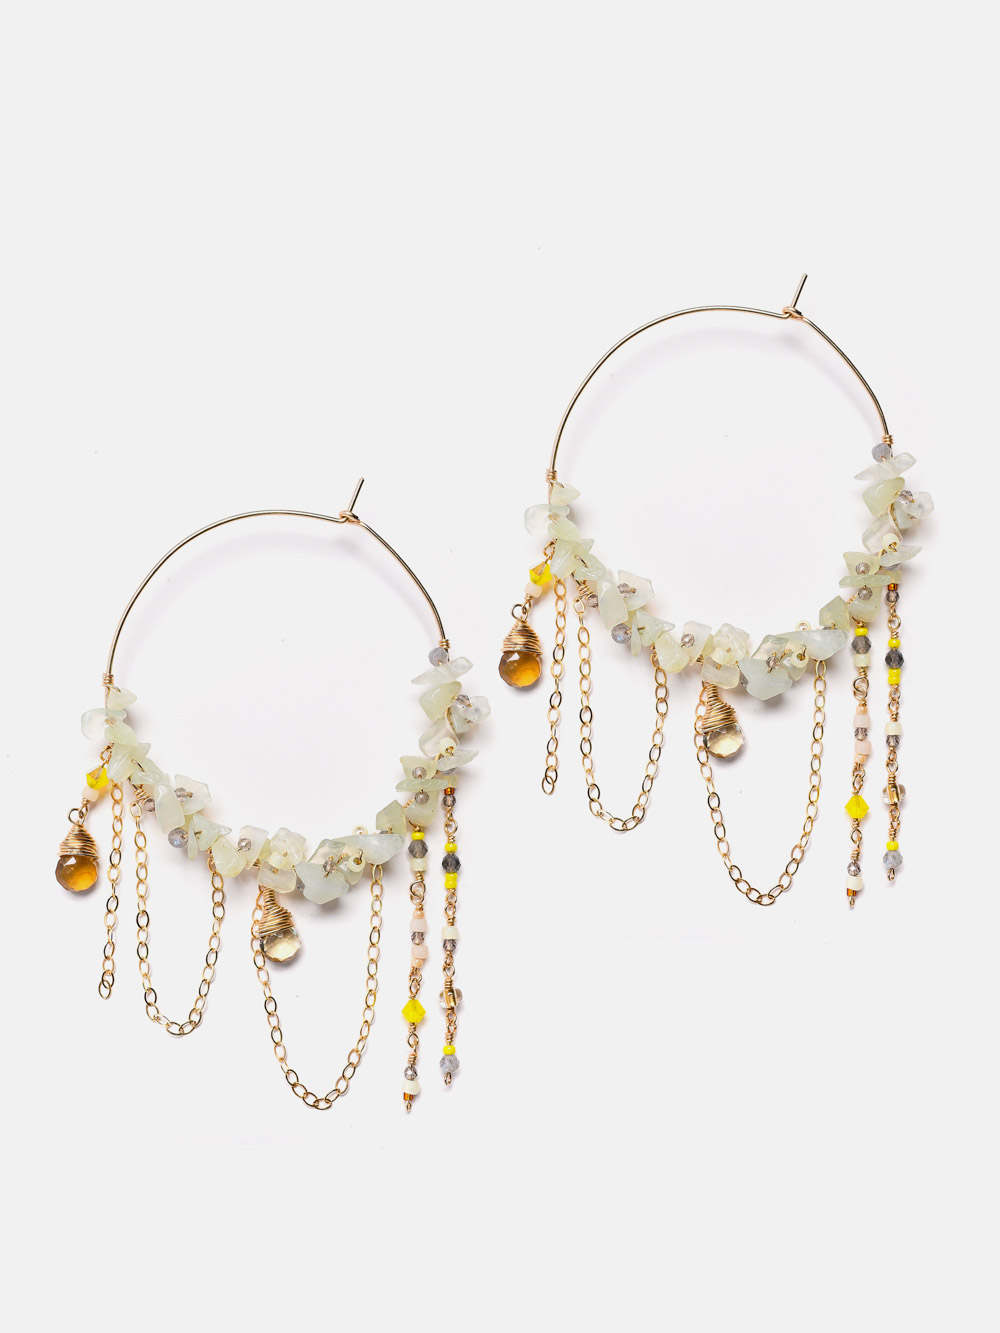 14k gold filled hoop earrings with gemstones and chains